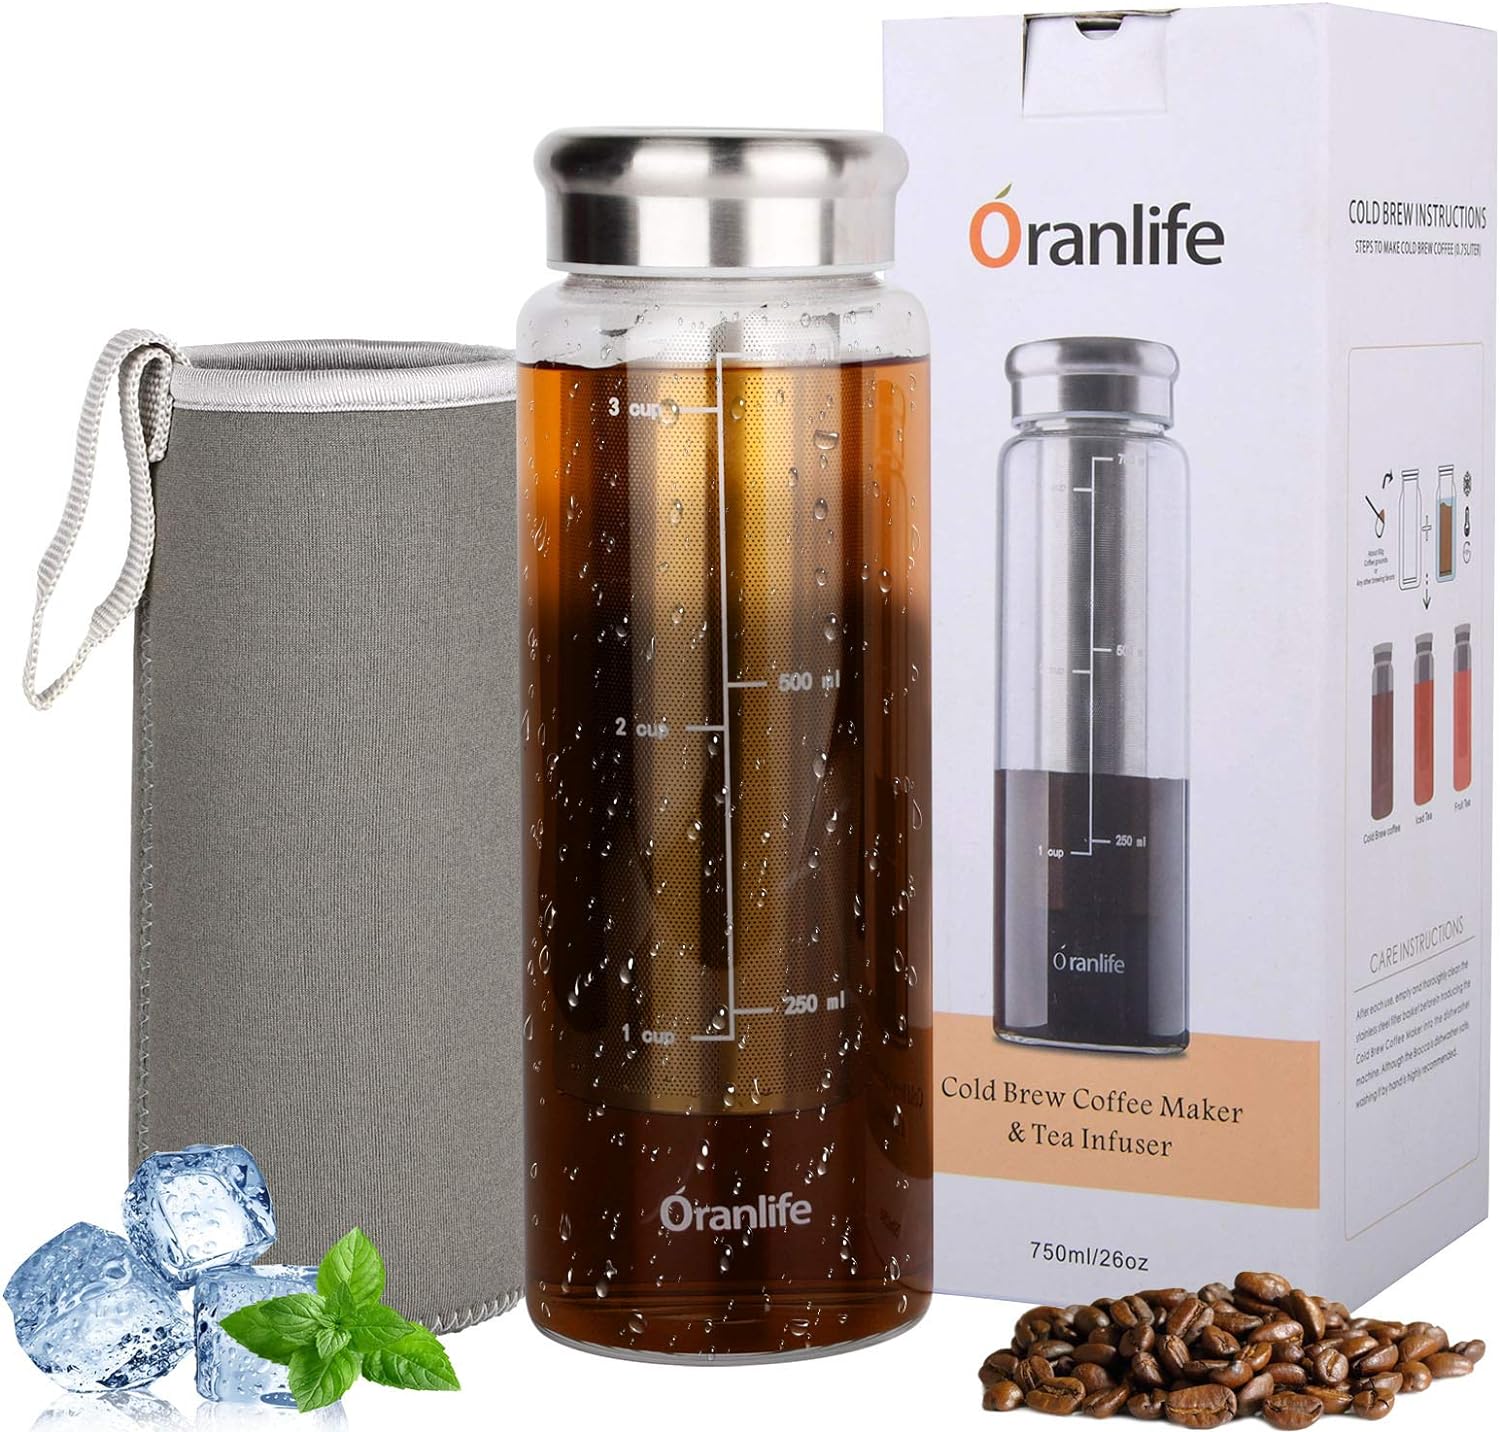 Oranlife Cold Brew Coffee Maker Review